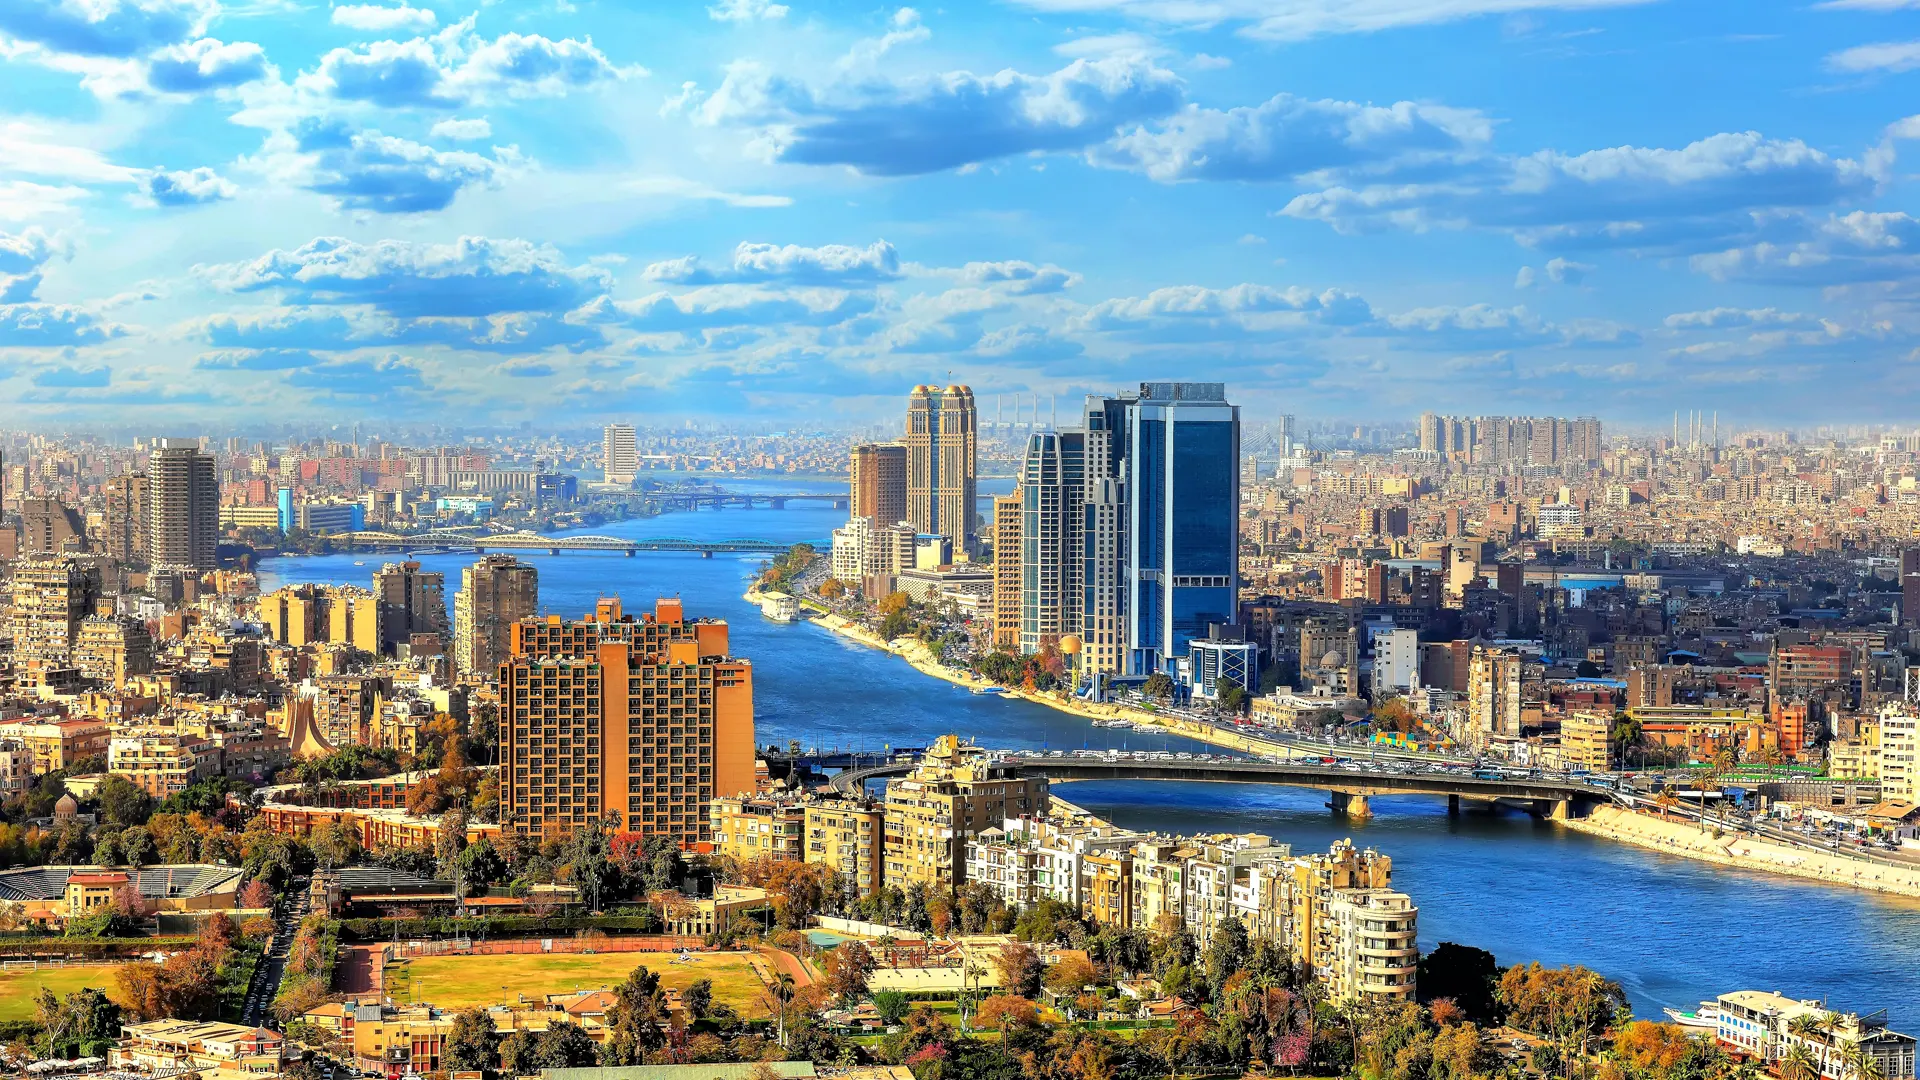 Cairo and The Nile